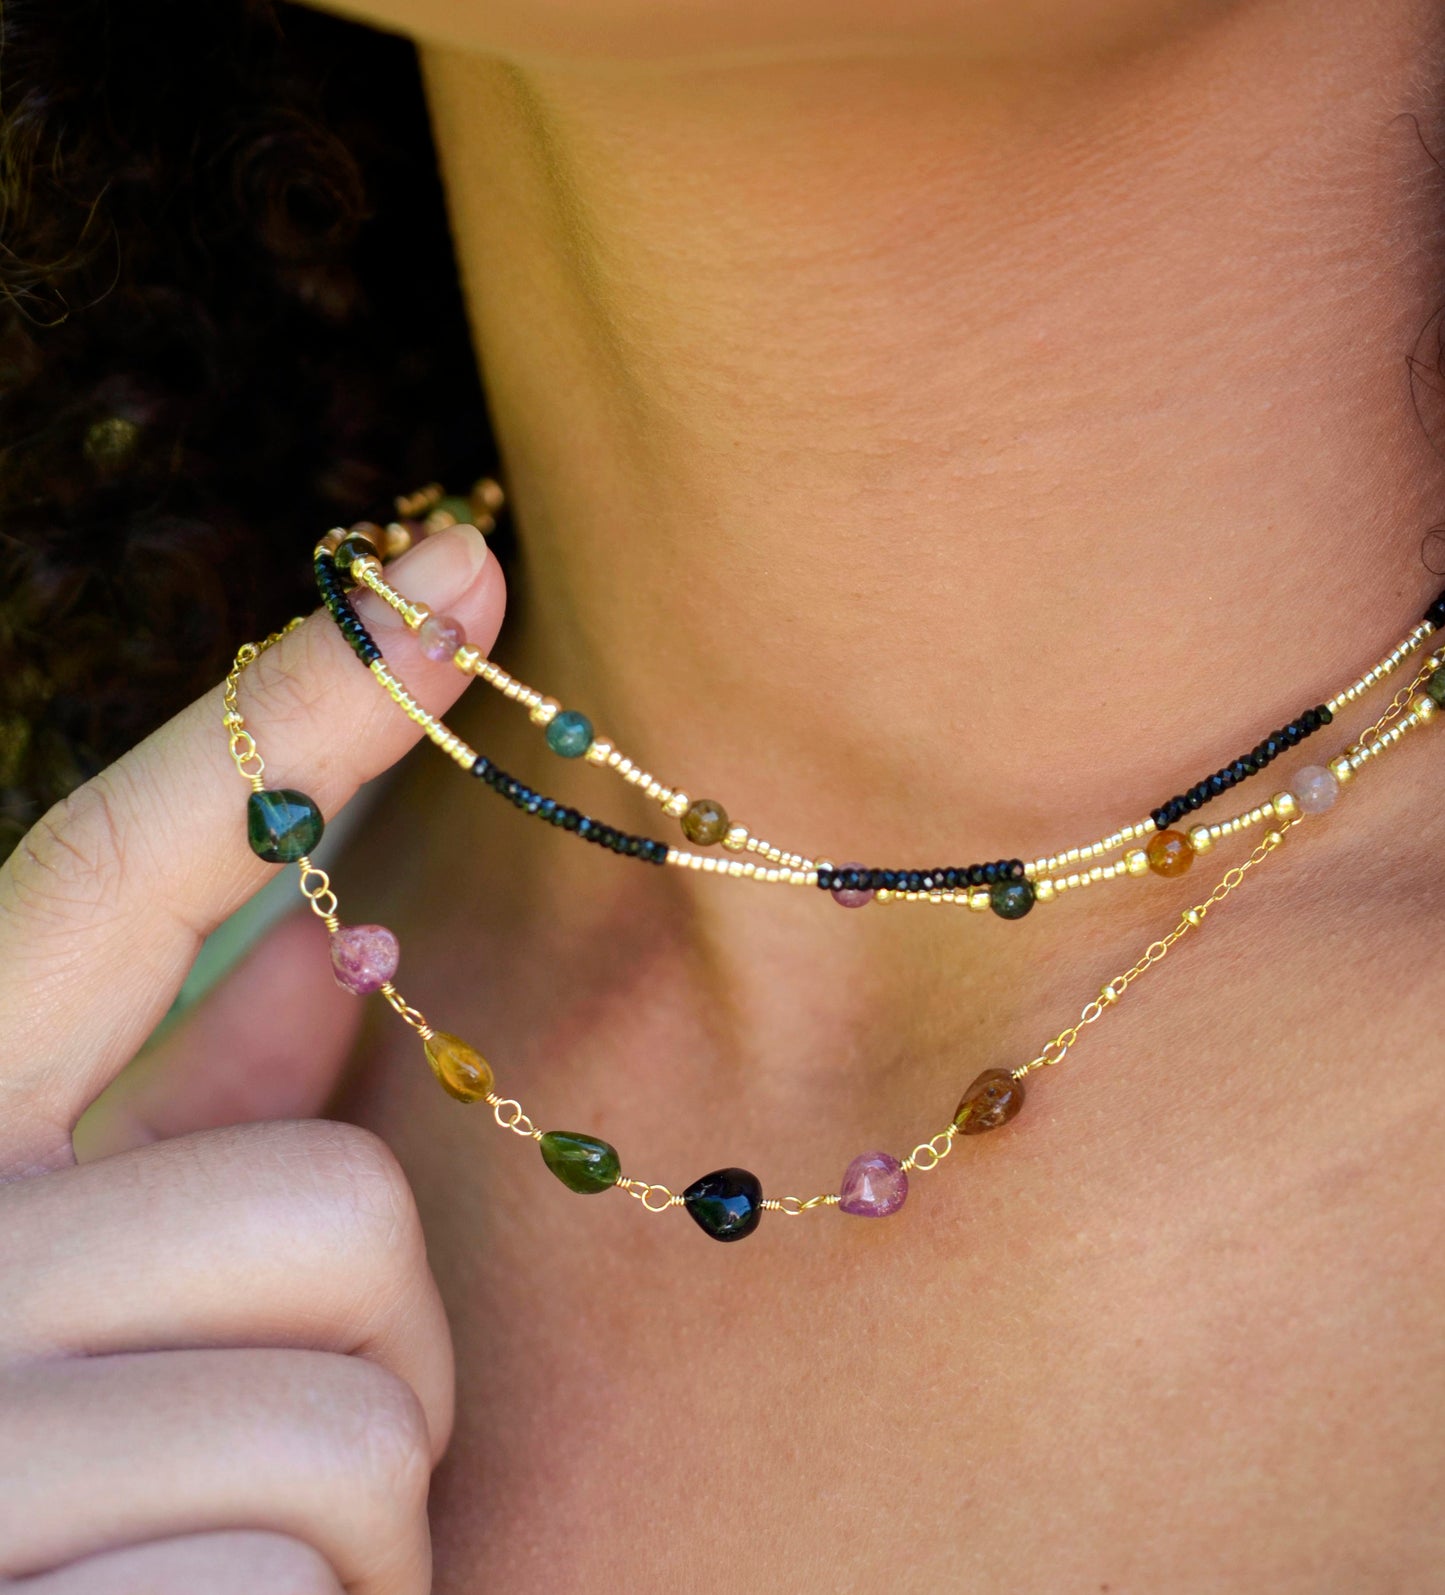 Multi color Tourmaline drops chain necklace. Shown in gold. Stone colors include: pink, green, black, yellow, or brown. Close up modeled image. Shown with a beaded tourmaline and black onyx necklace.